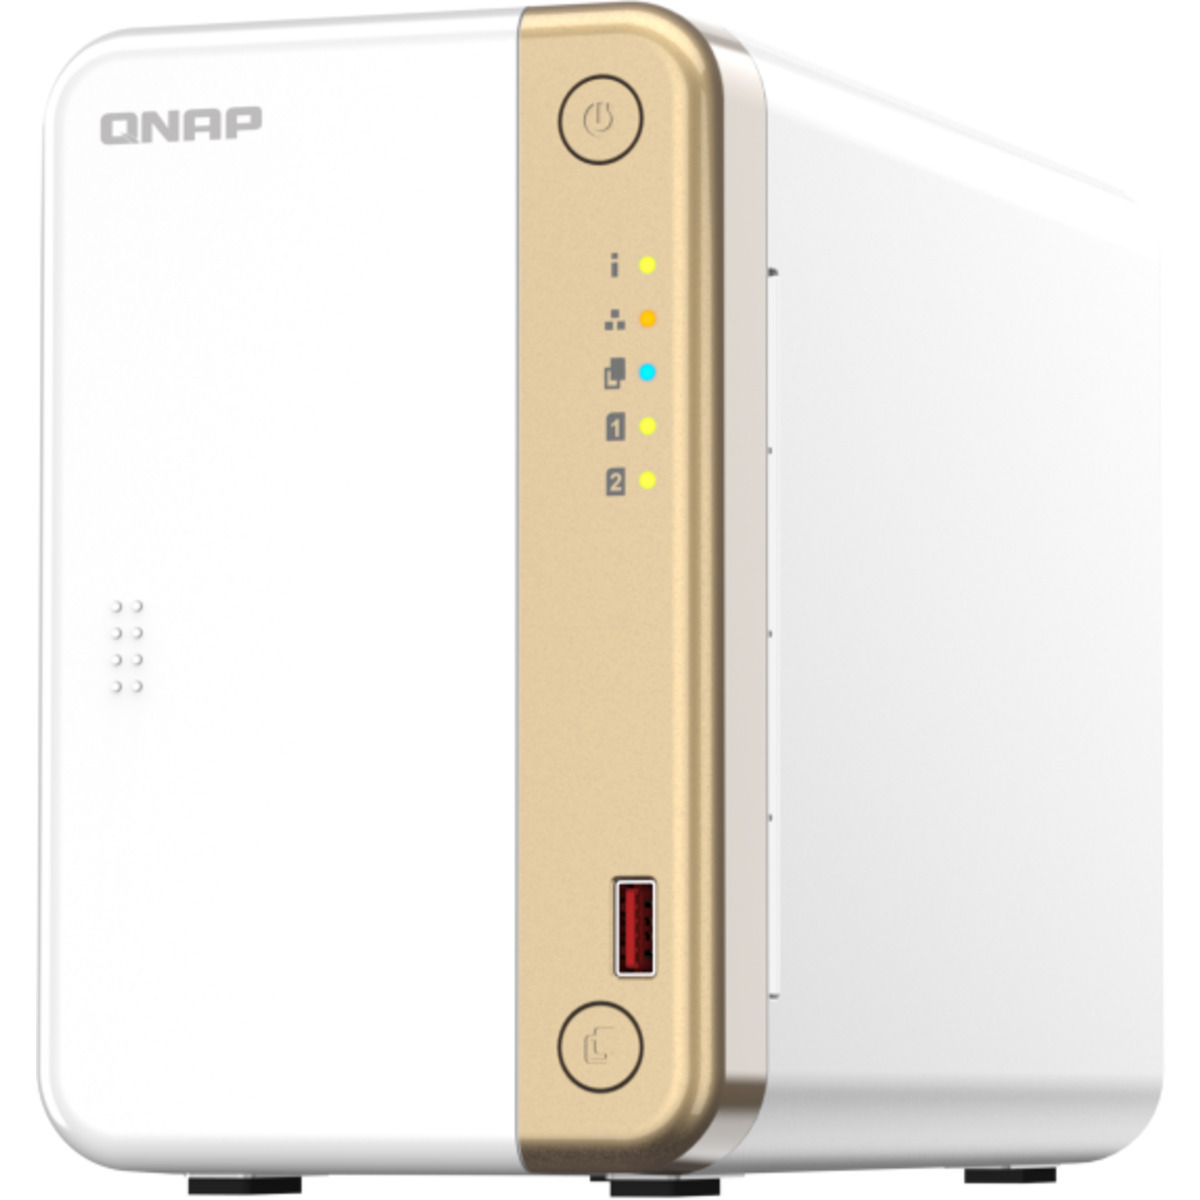 QNAP TS-262 16tb 2-Bay Desktop Personal / Basic Home / Small Office NAS - Network Attached Storage Device 1x16tb Toshiba Enterprise Capacity MG08ACA16TE 3.5 7200rpm SATA 6Gb/s HDD ENTERPRISE Class Drives Installed - Burn-In Tested TS-262